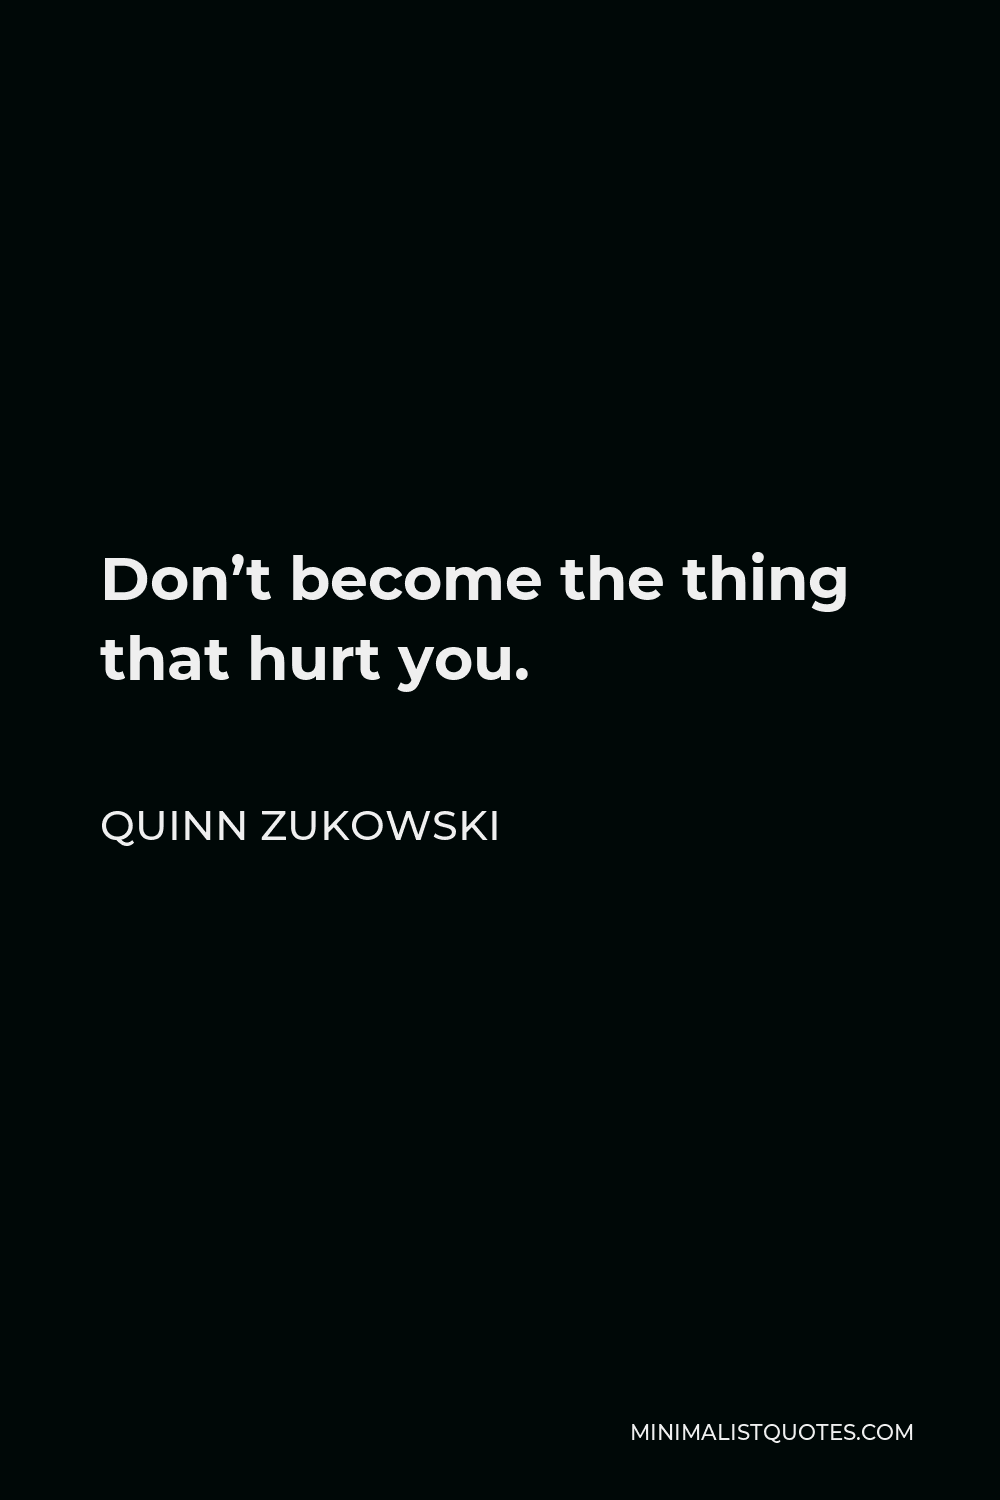 Quinn Zukowski Quote - Don’t become the thing that hurt you.